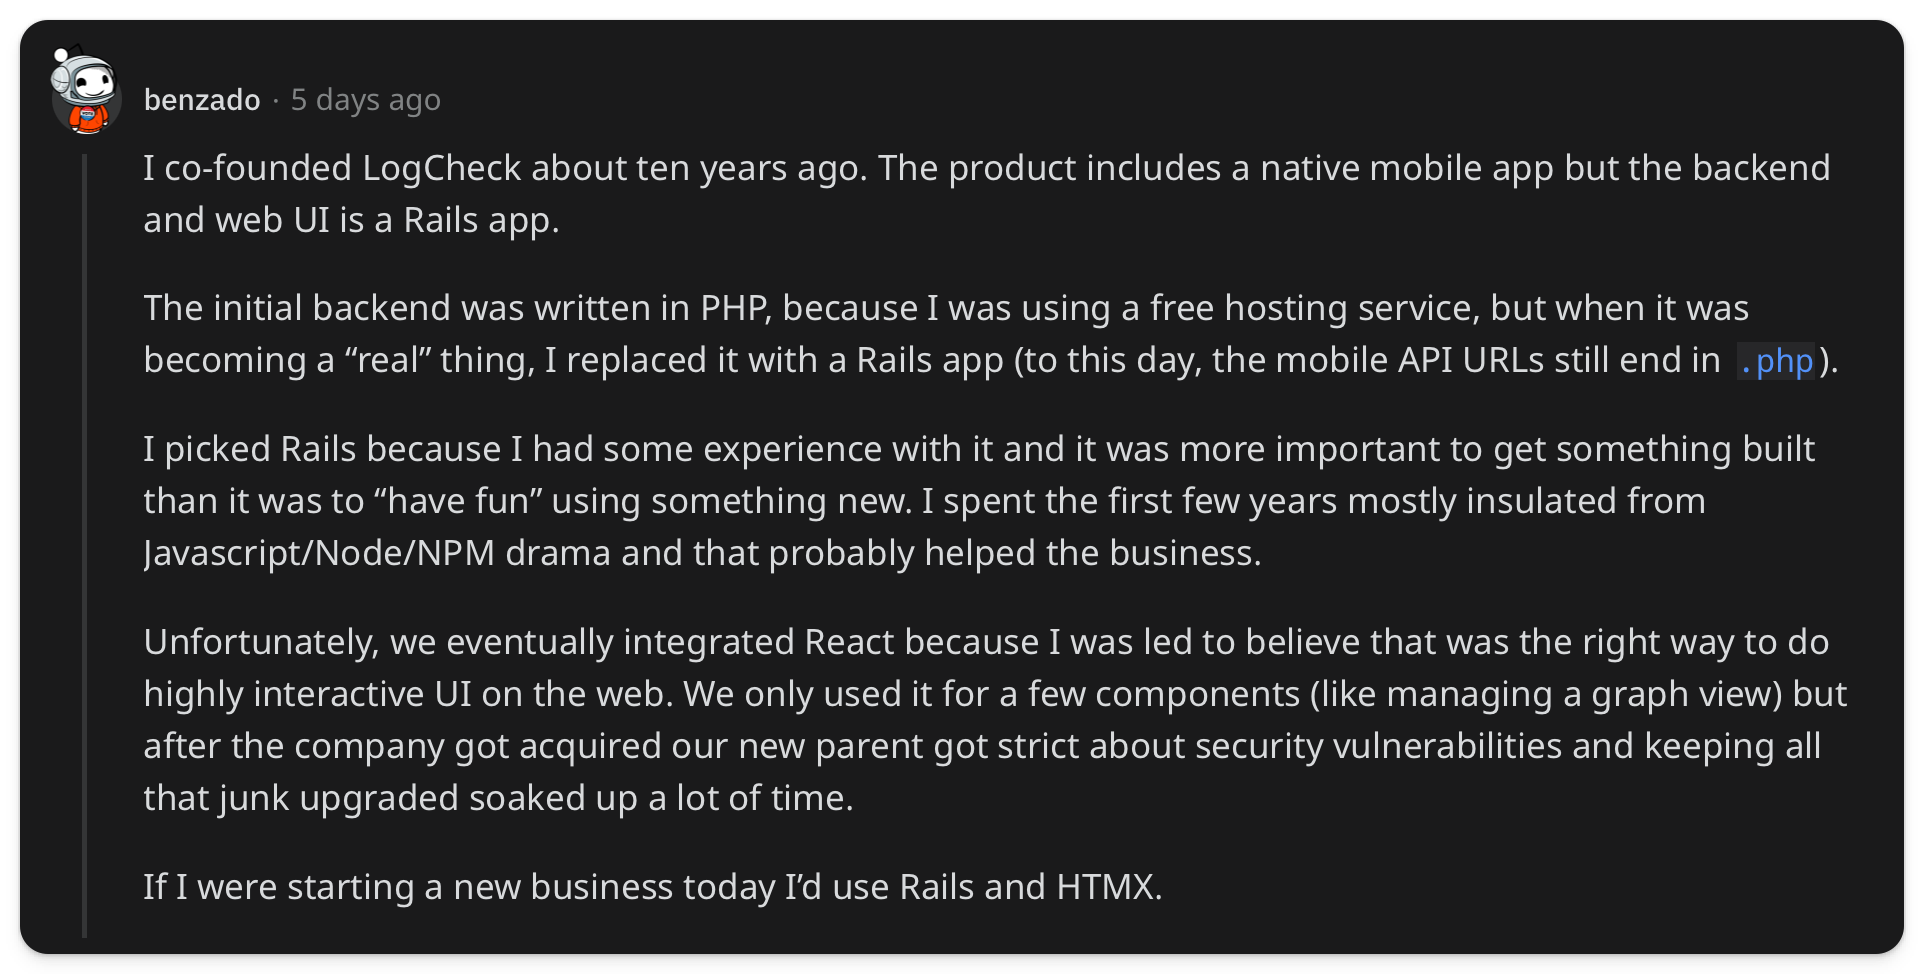 "I co-founded LogCheck about ten years ago. The product includes a native mobile app but the backend and web UI is a Rails app. The initial backend was written in PHP, because I was using a free hosting service, but when it was becoming a real thing, I replaced it with a Rails app (to this day, the mobile API URLs still end in .php). I picked Rails because I had some experience with it and it was more important to get something built than it was to have fun using something new. I spent the first few years mostly insulated from Javascript/Node/NPM drama and that probably helped the business. Unfortunately, we eventually integrated React because I was led to believe that was the right way to do highly interactive UI on the web. We only used it for a few components (like managing a graph view) but after the company got acquired our new parent got strict about security vulnerabilities and keeping all that junk upgraded soaked up a lot of time. If I were starting a new business today Id use Rails and HTMX"